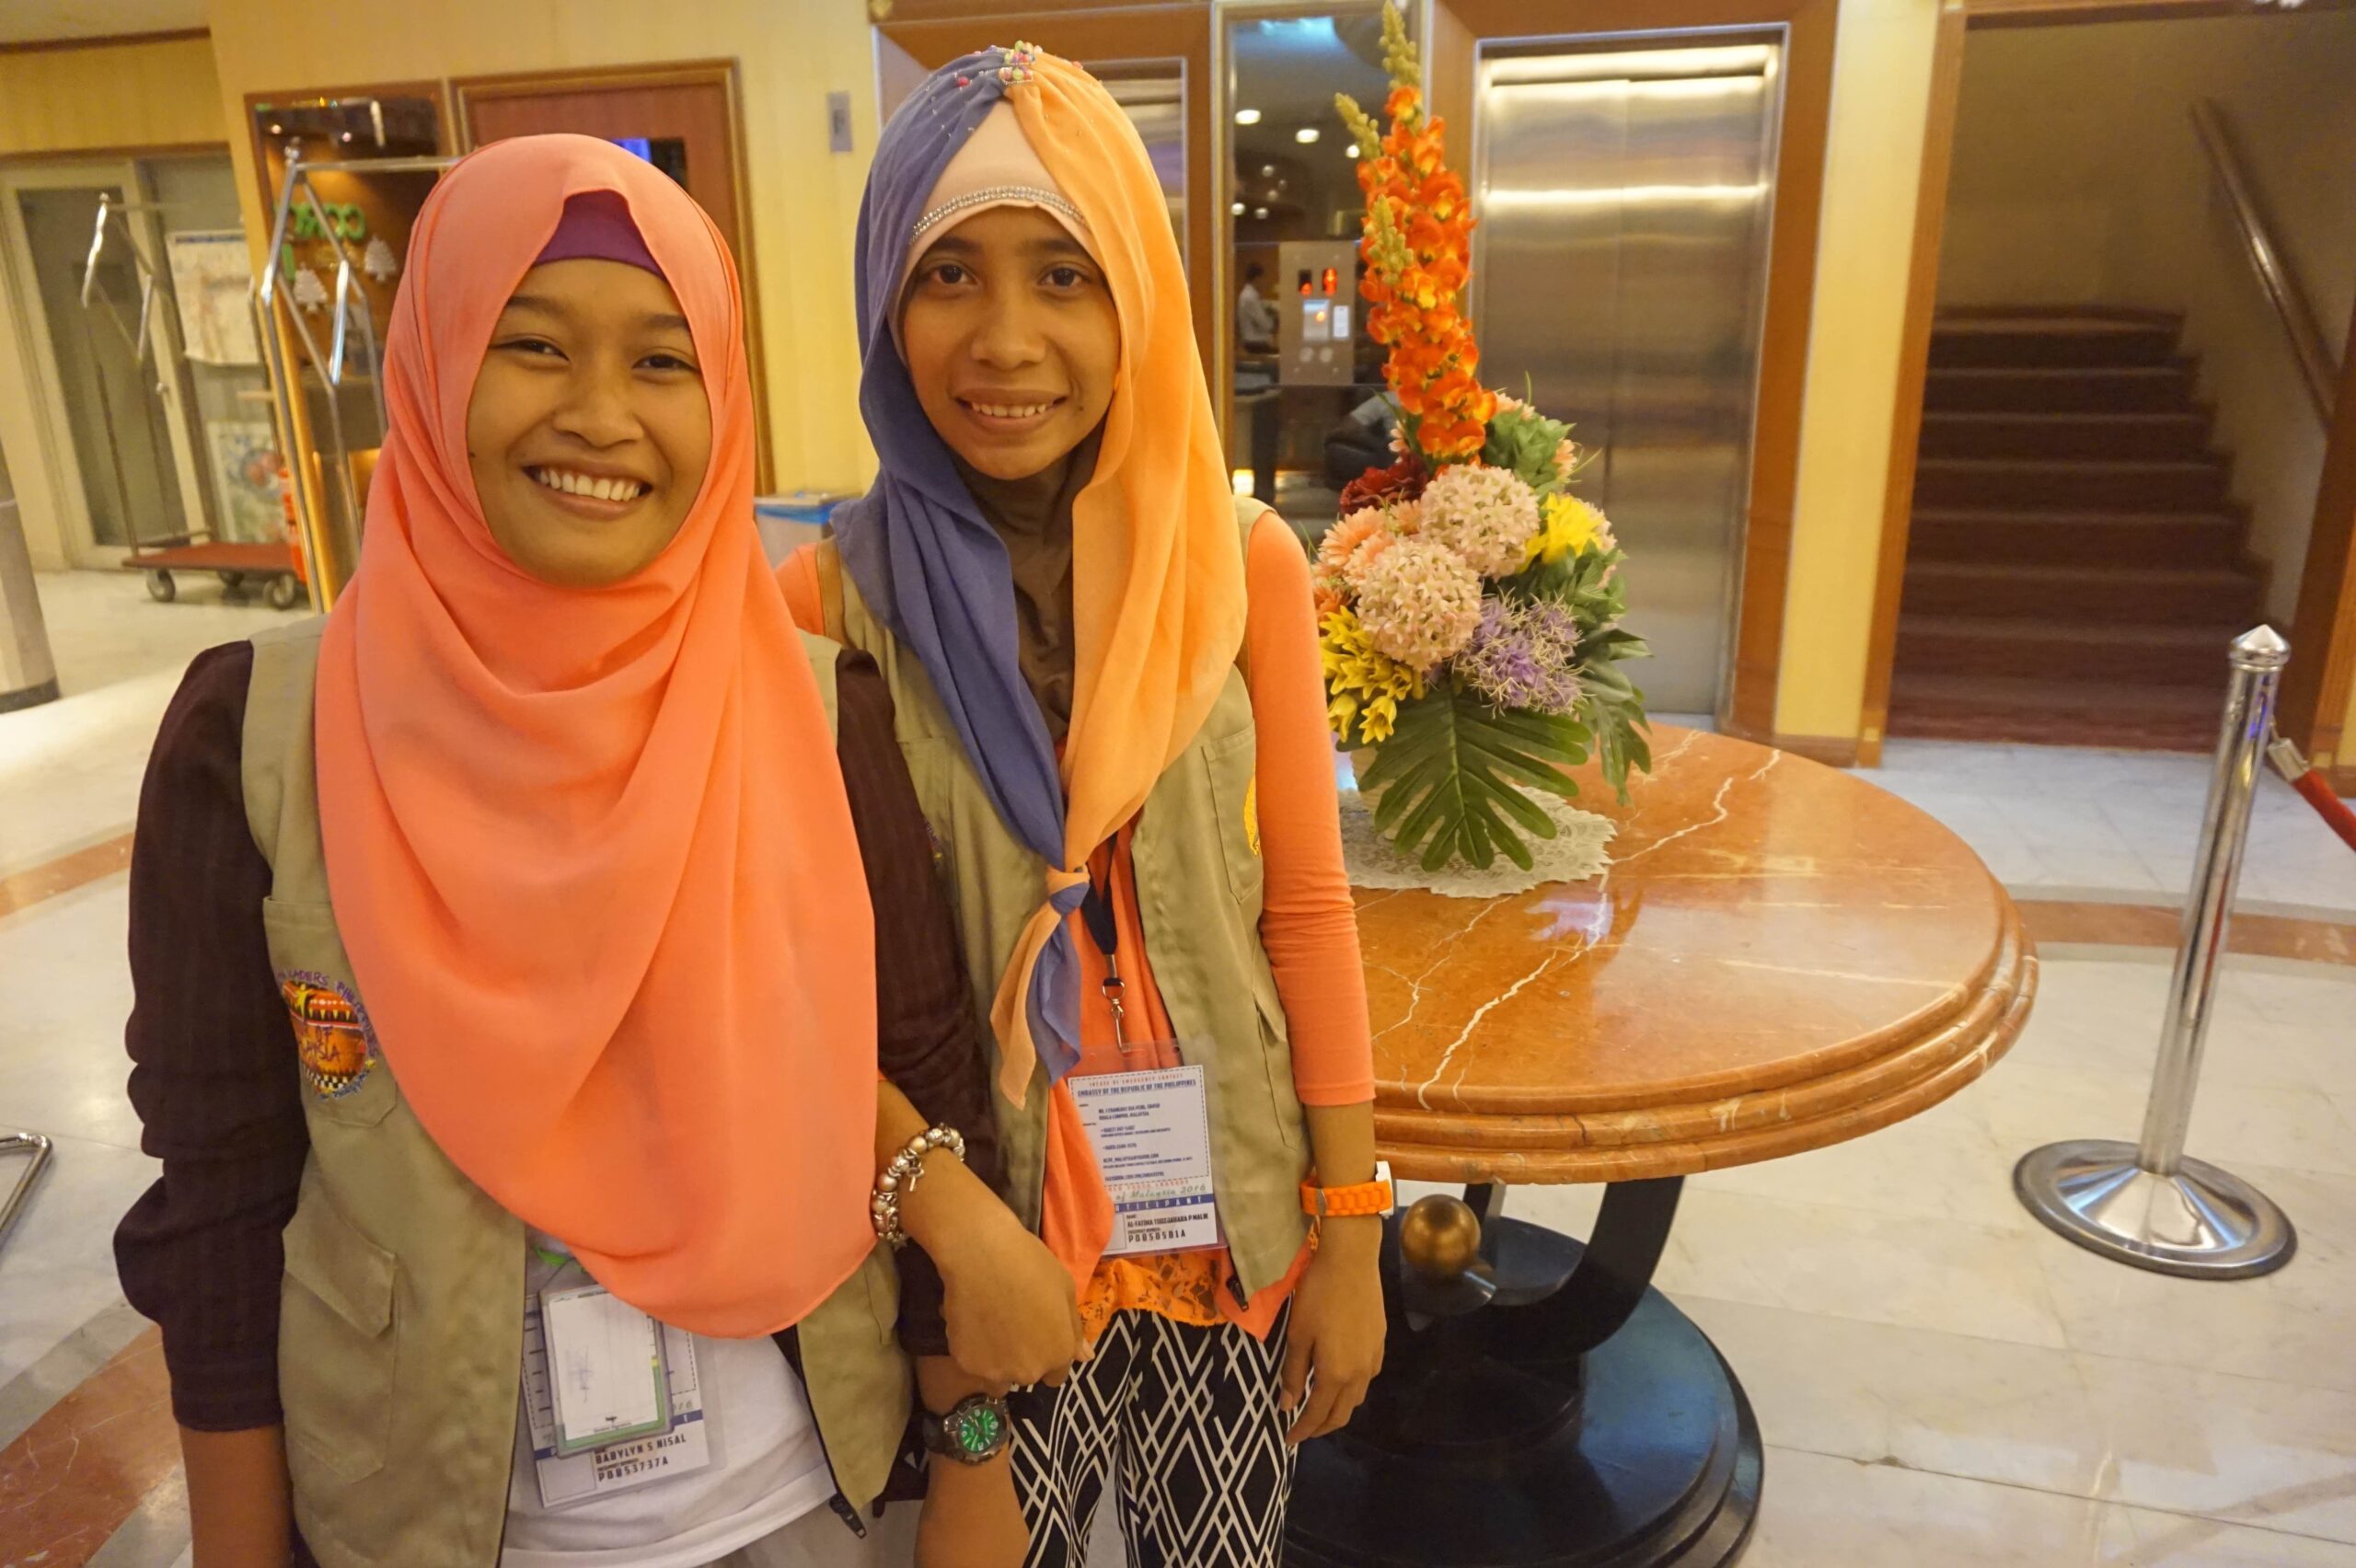 Sulu youth leaders learn about diversity, unity in Malaysia trip